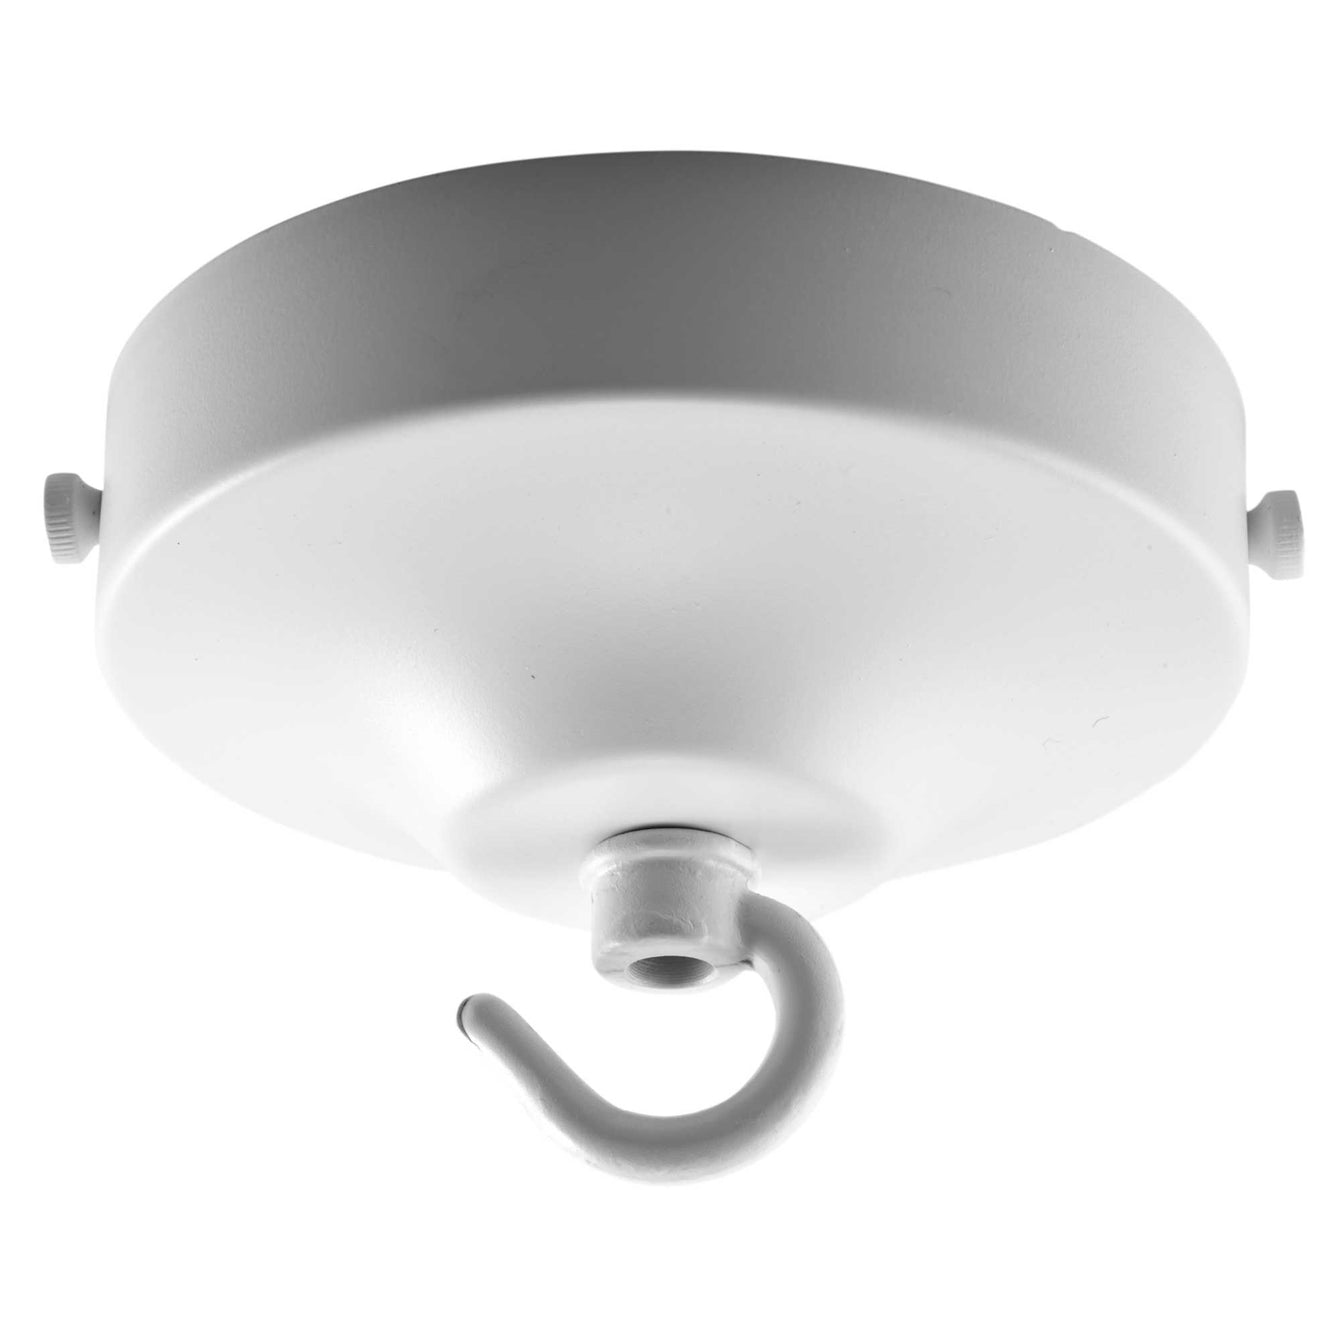 ElekTek 100mm Diameter Convex Ceiling Rose with Strap Bracket and Hook Metallic and Powder Coated Finishes 